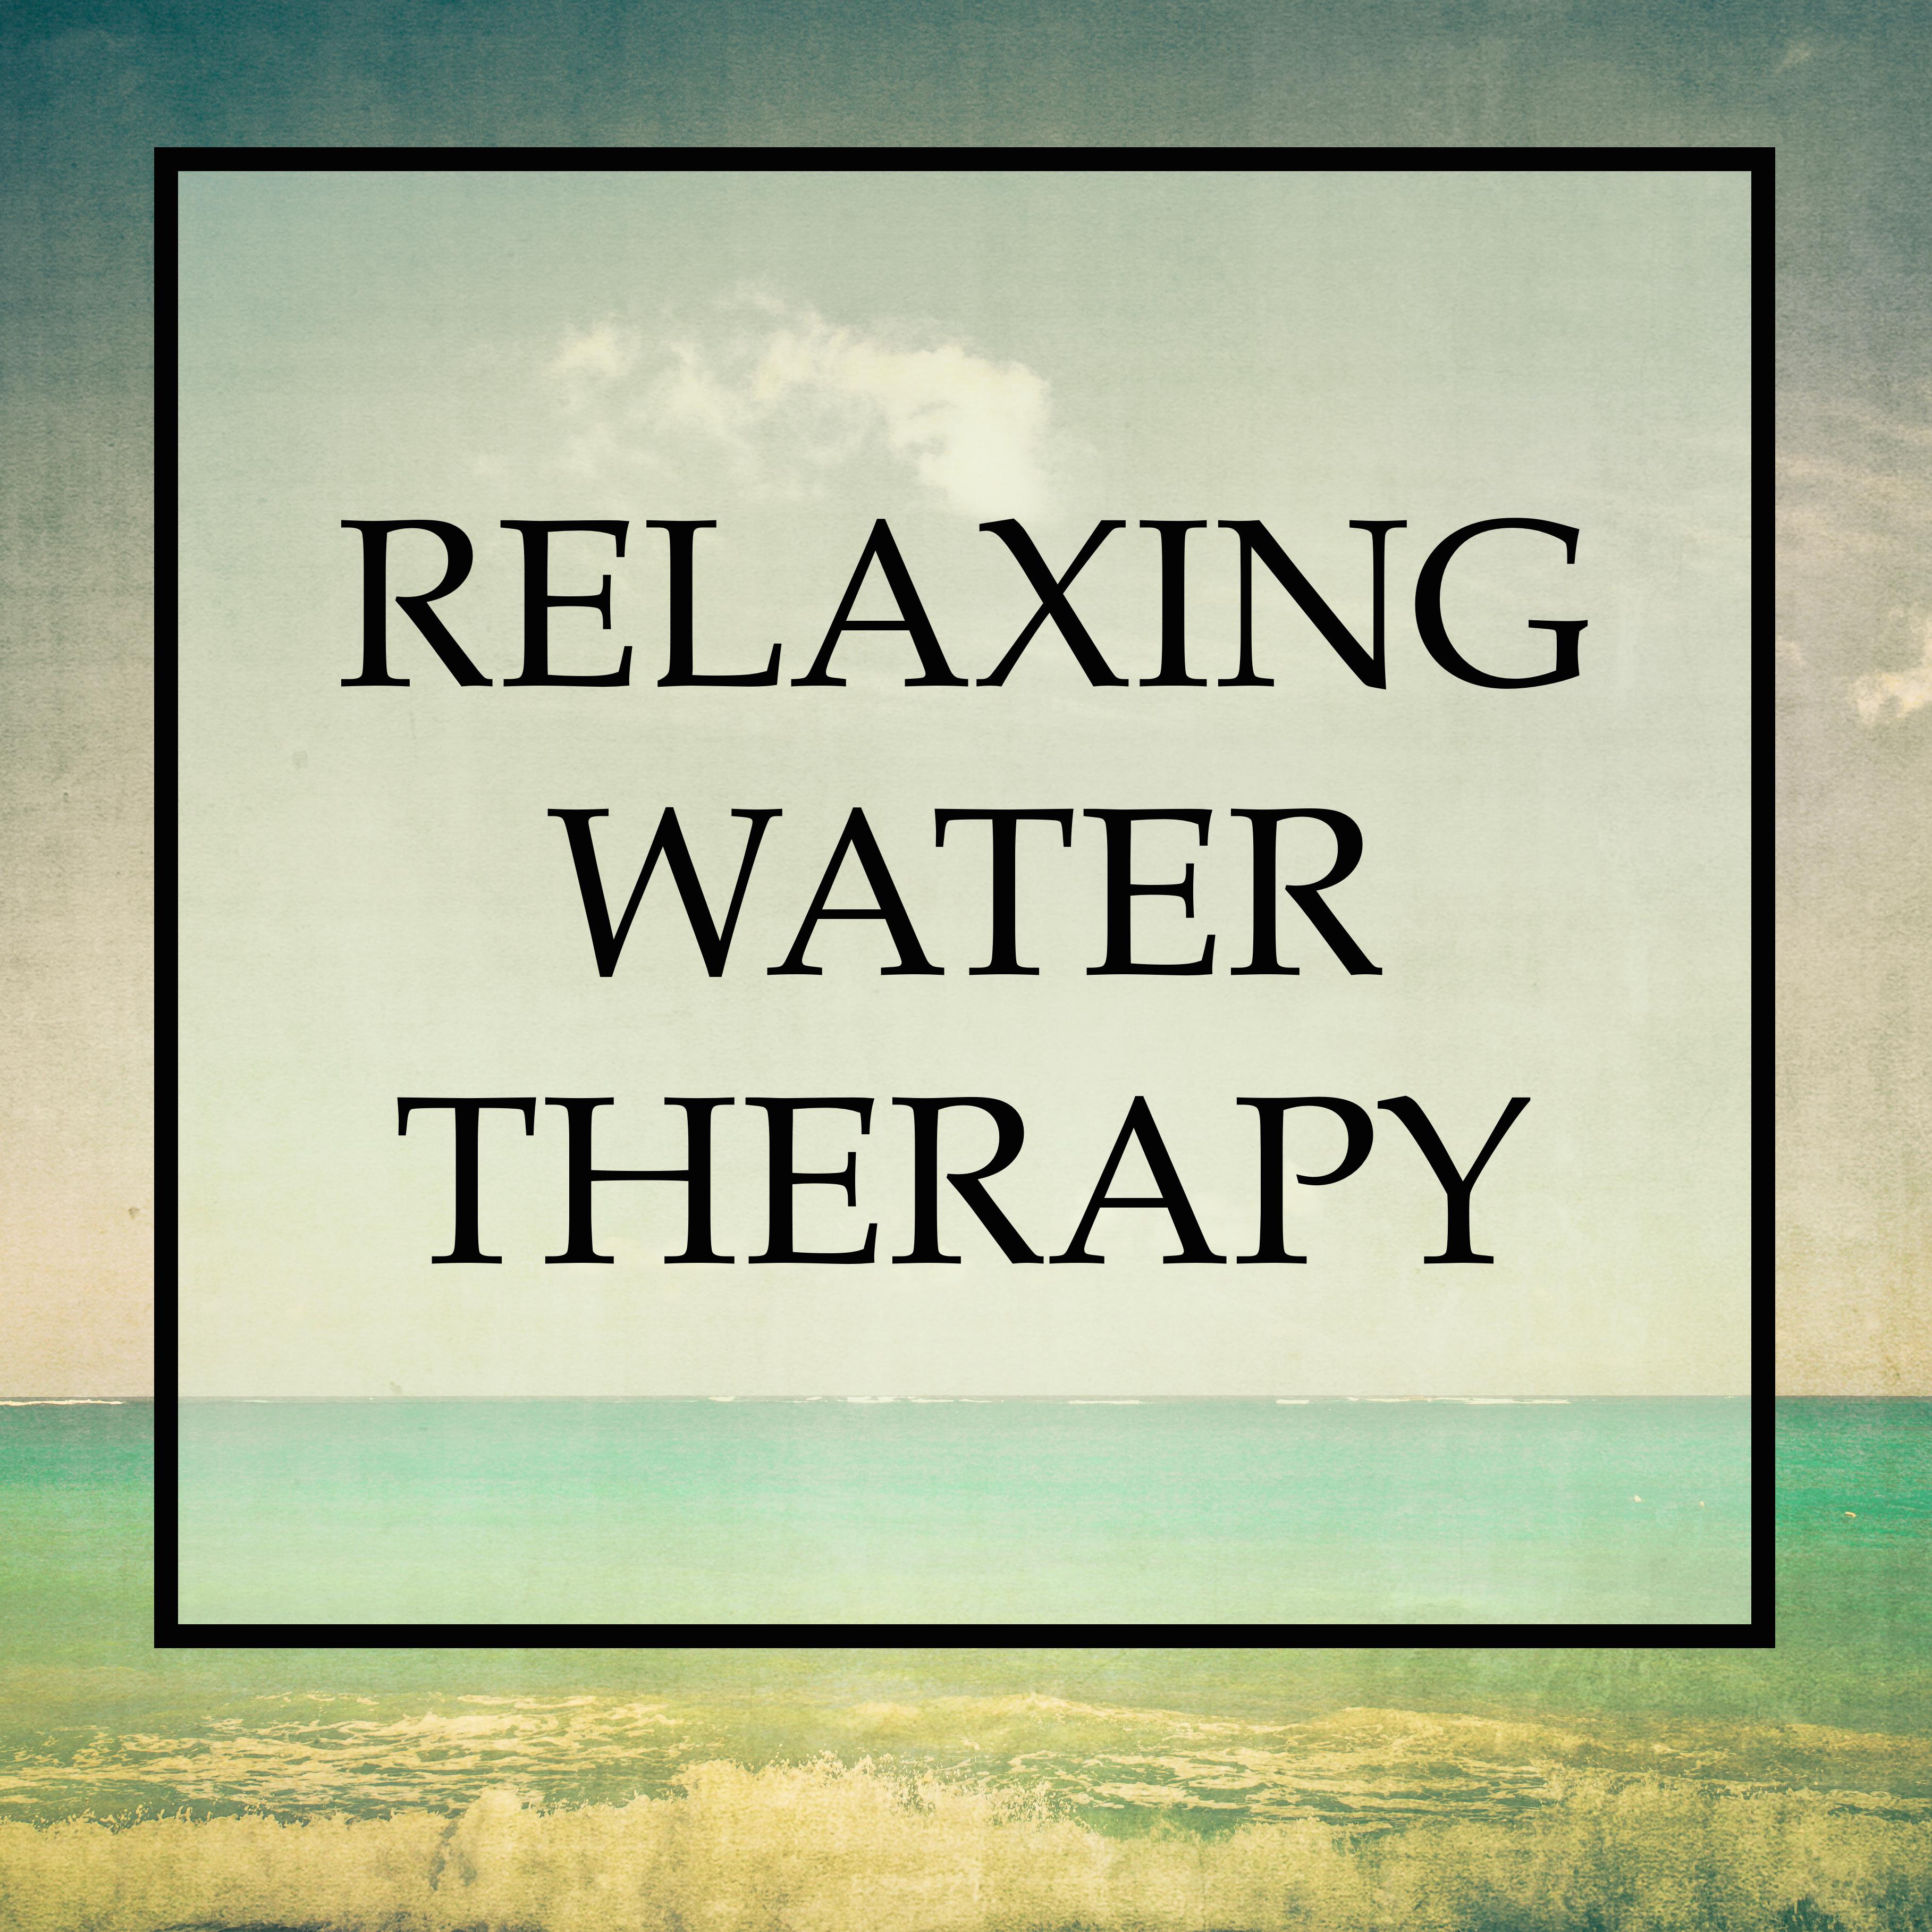 Sounds of Hidden Springs - 20 Relaxing Water Melodies to Unlock Your Inner Potential and Improve Your Health, Sleep and Mental Well-Being Through Hydrotherapy and Meditation